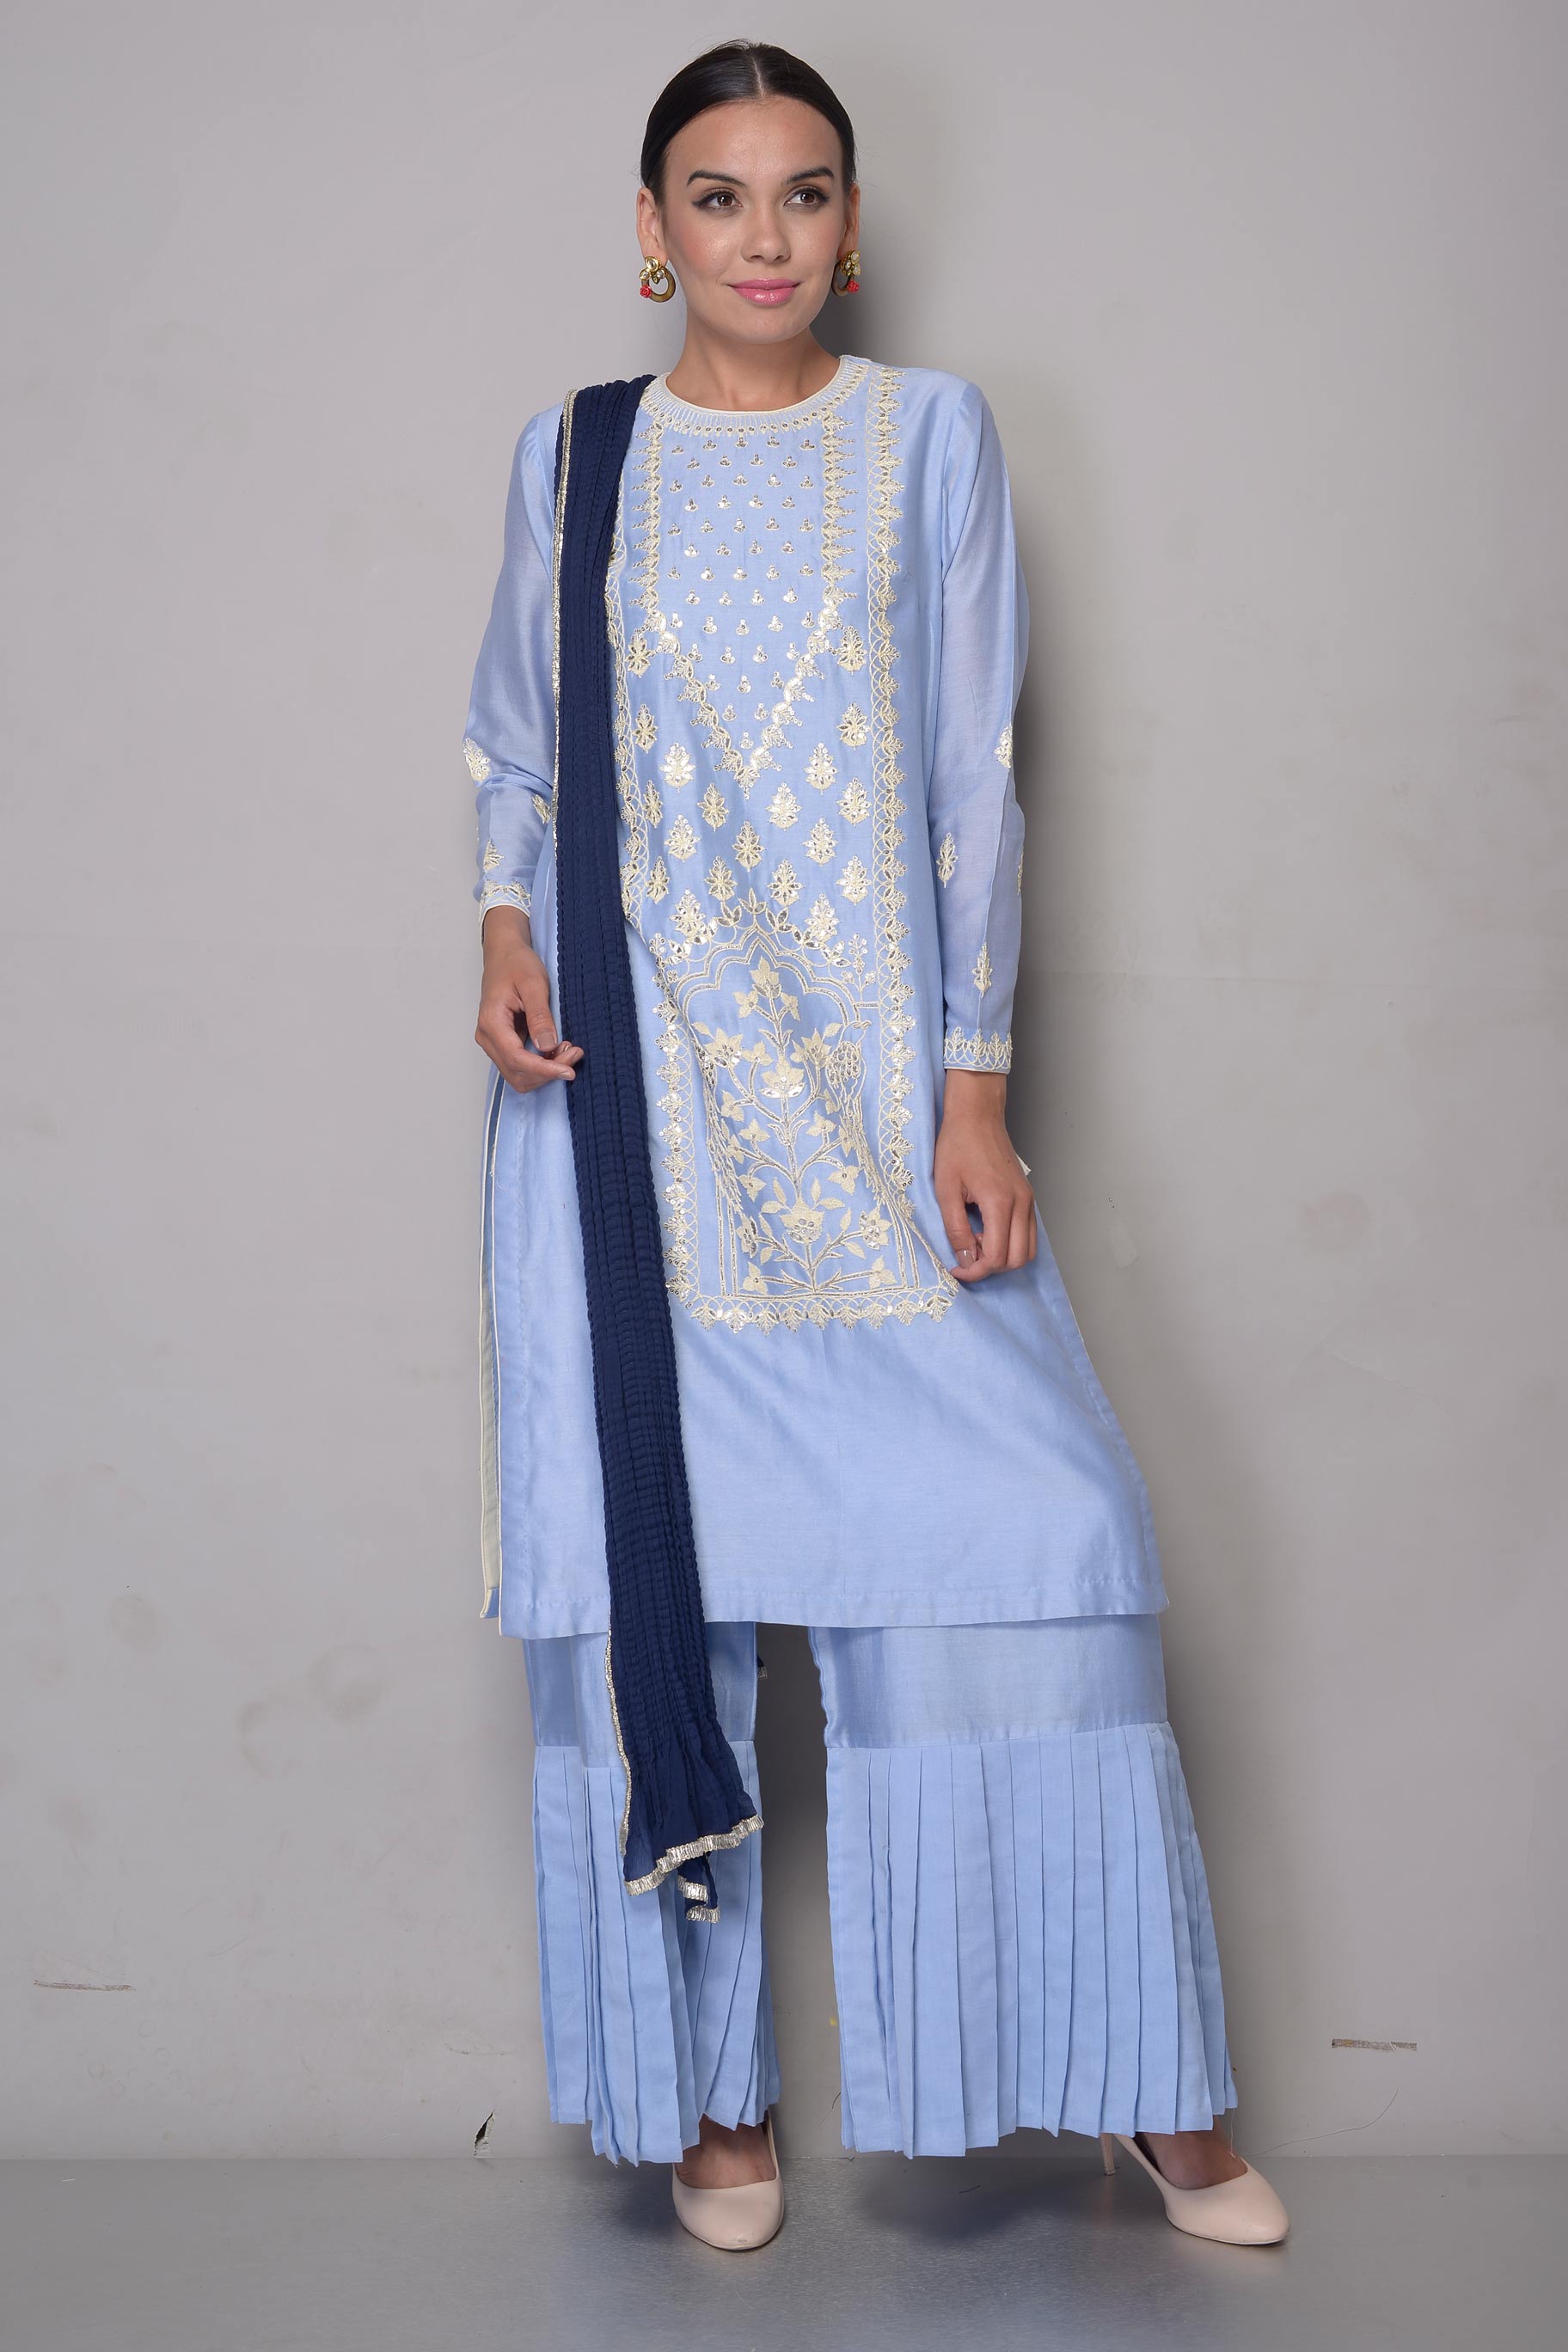 Buy sky blue gota patti chanderi suit with sharara online in USA and navy blue dupatta. To buy more such exquisite Indian designer suits in USA, shop at Pure Elegance Indian fashion store for women in USA or shop online.-full view